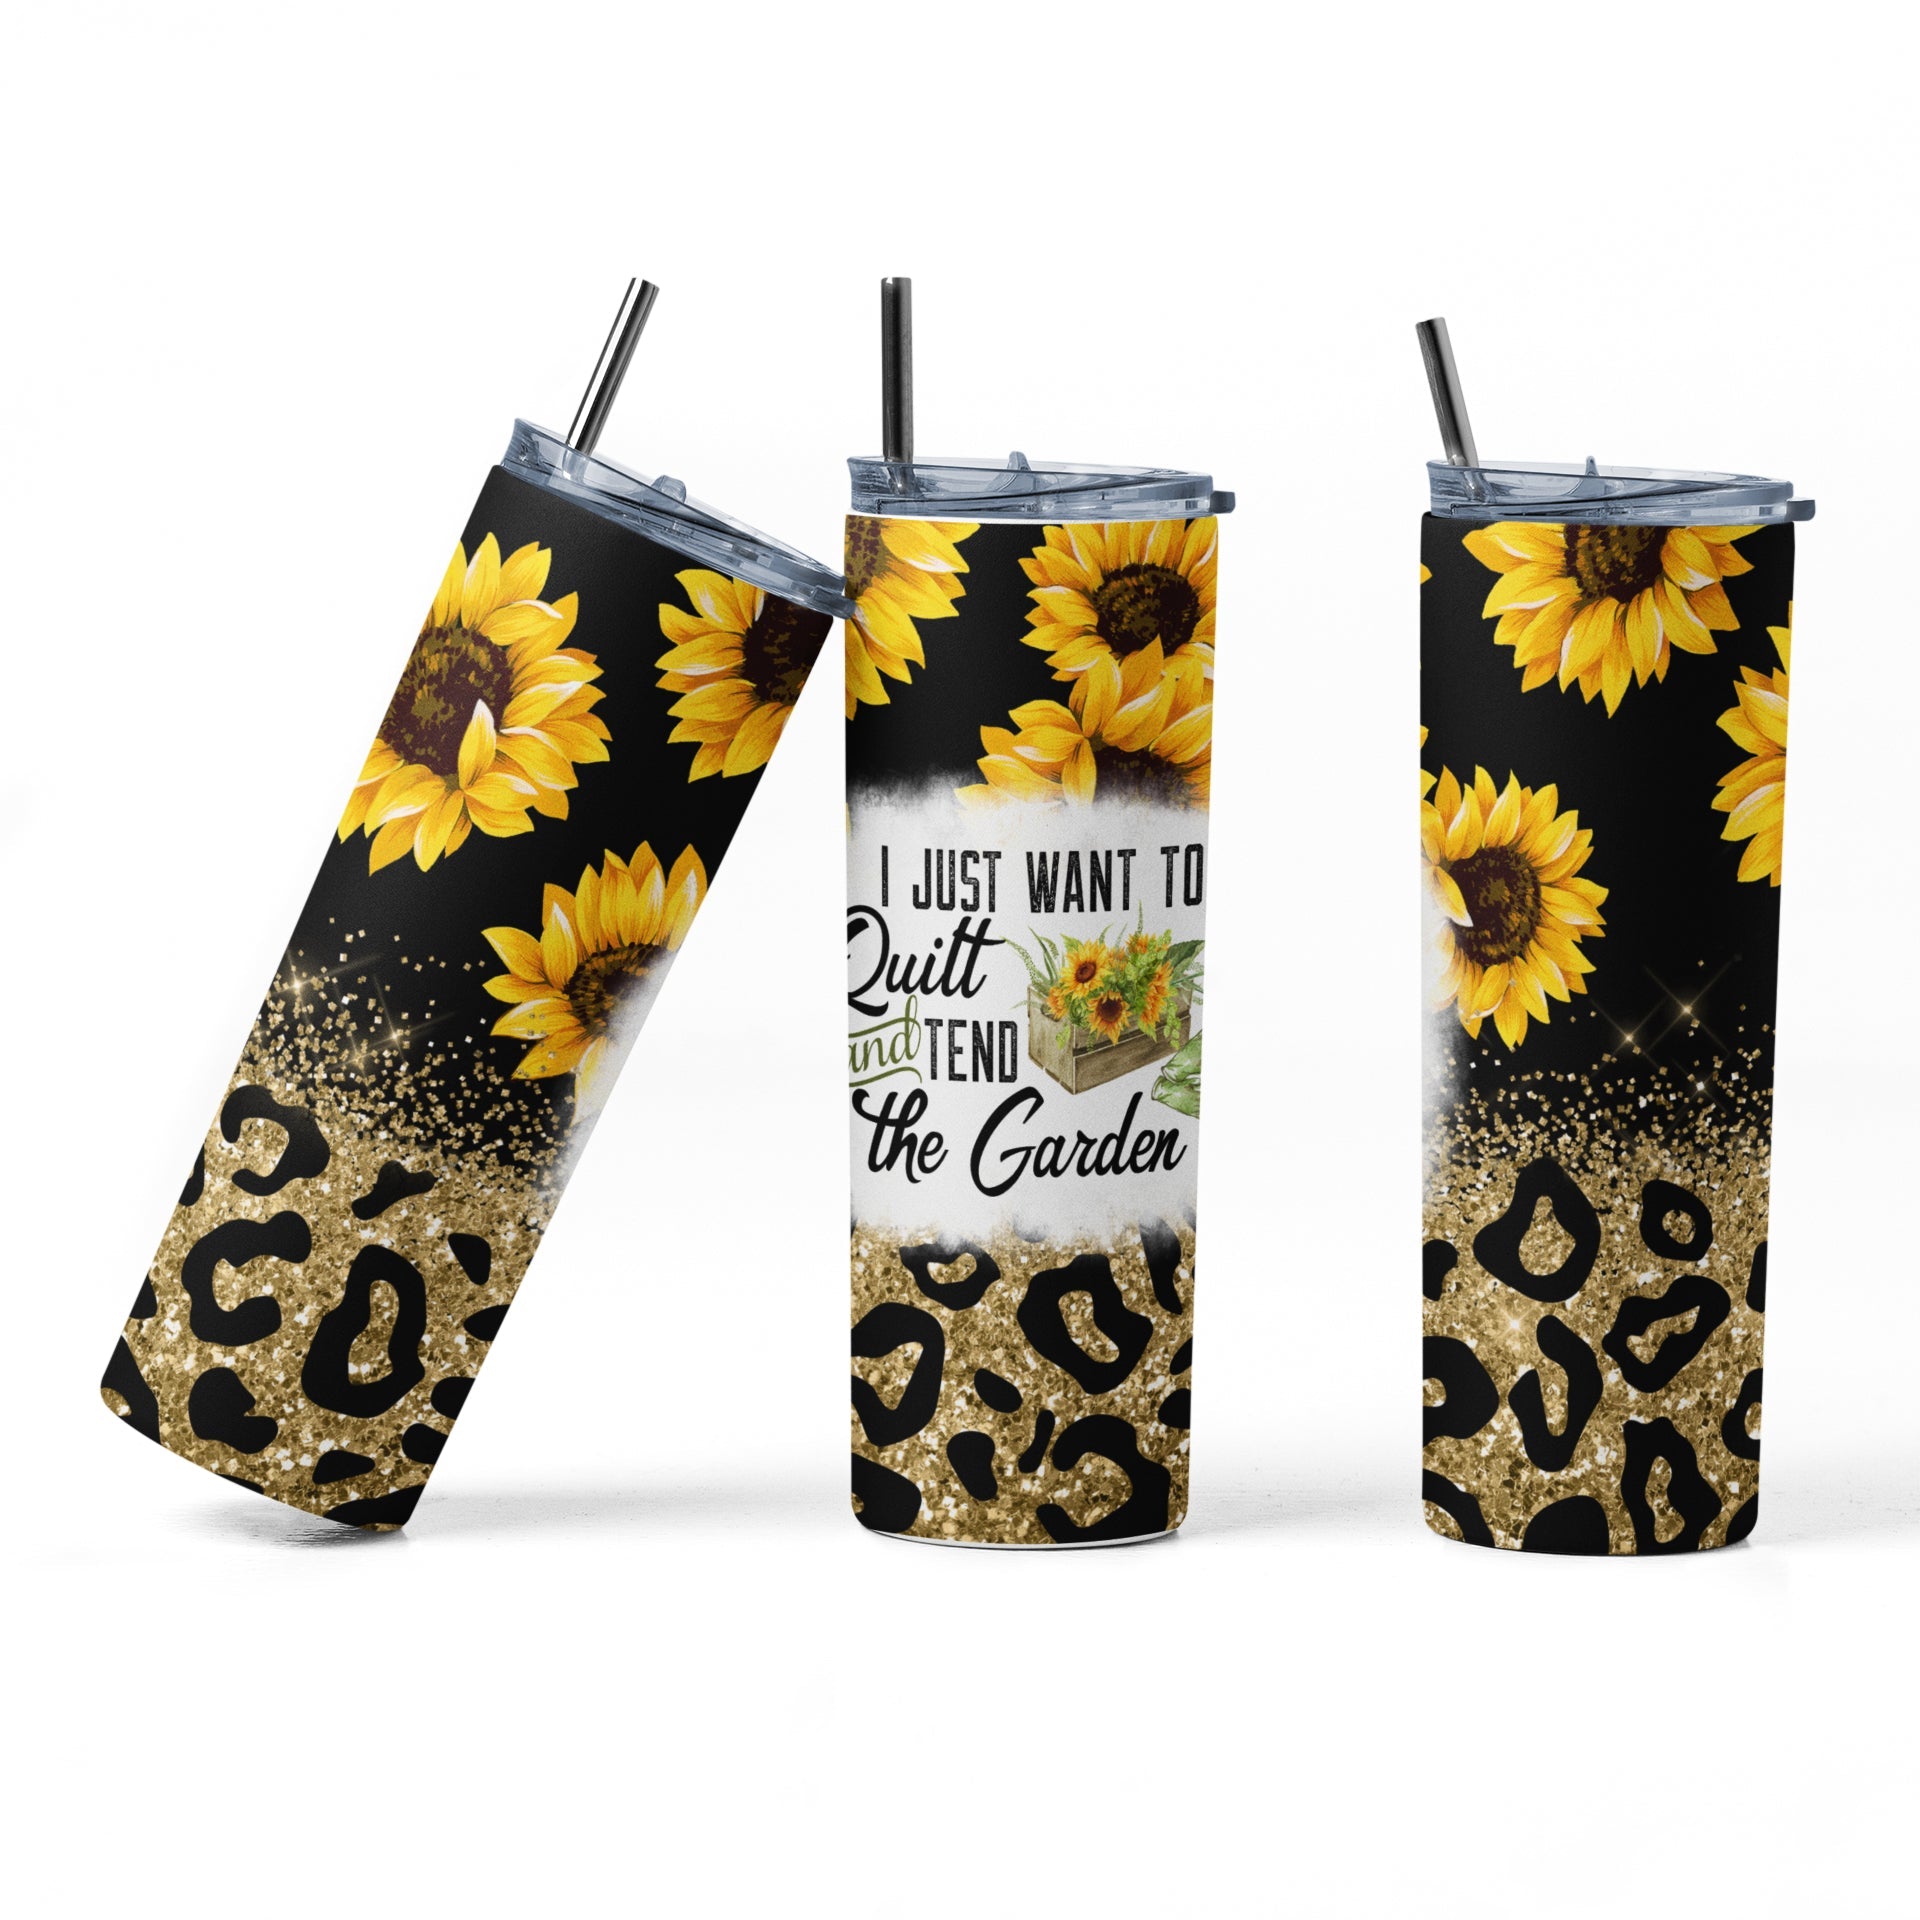 I Just Want to Quilt and Tend the Garden. Sunflower theme quilting and gardening tumbler - Jammin Threads